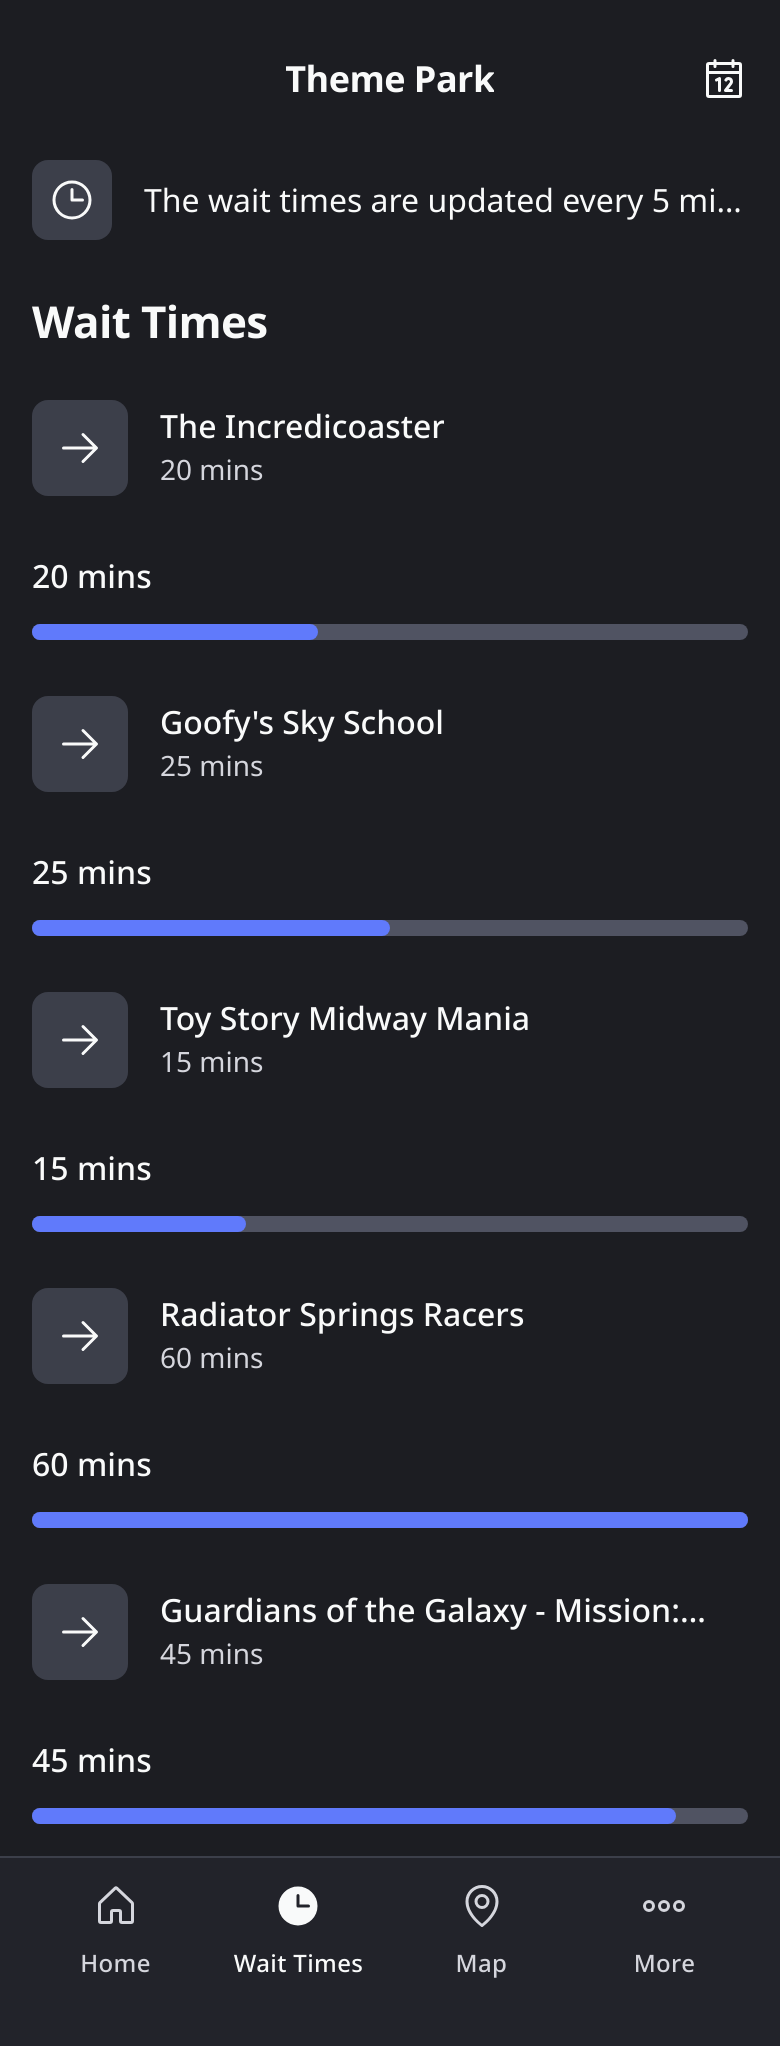 Page in a theme park attraction waiting times app, where users can view the queue times of all the attractions of a theme park. List only with colors for the different waiting times. Don't use images for the attractions. The page must be playful and modern.